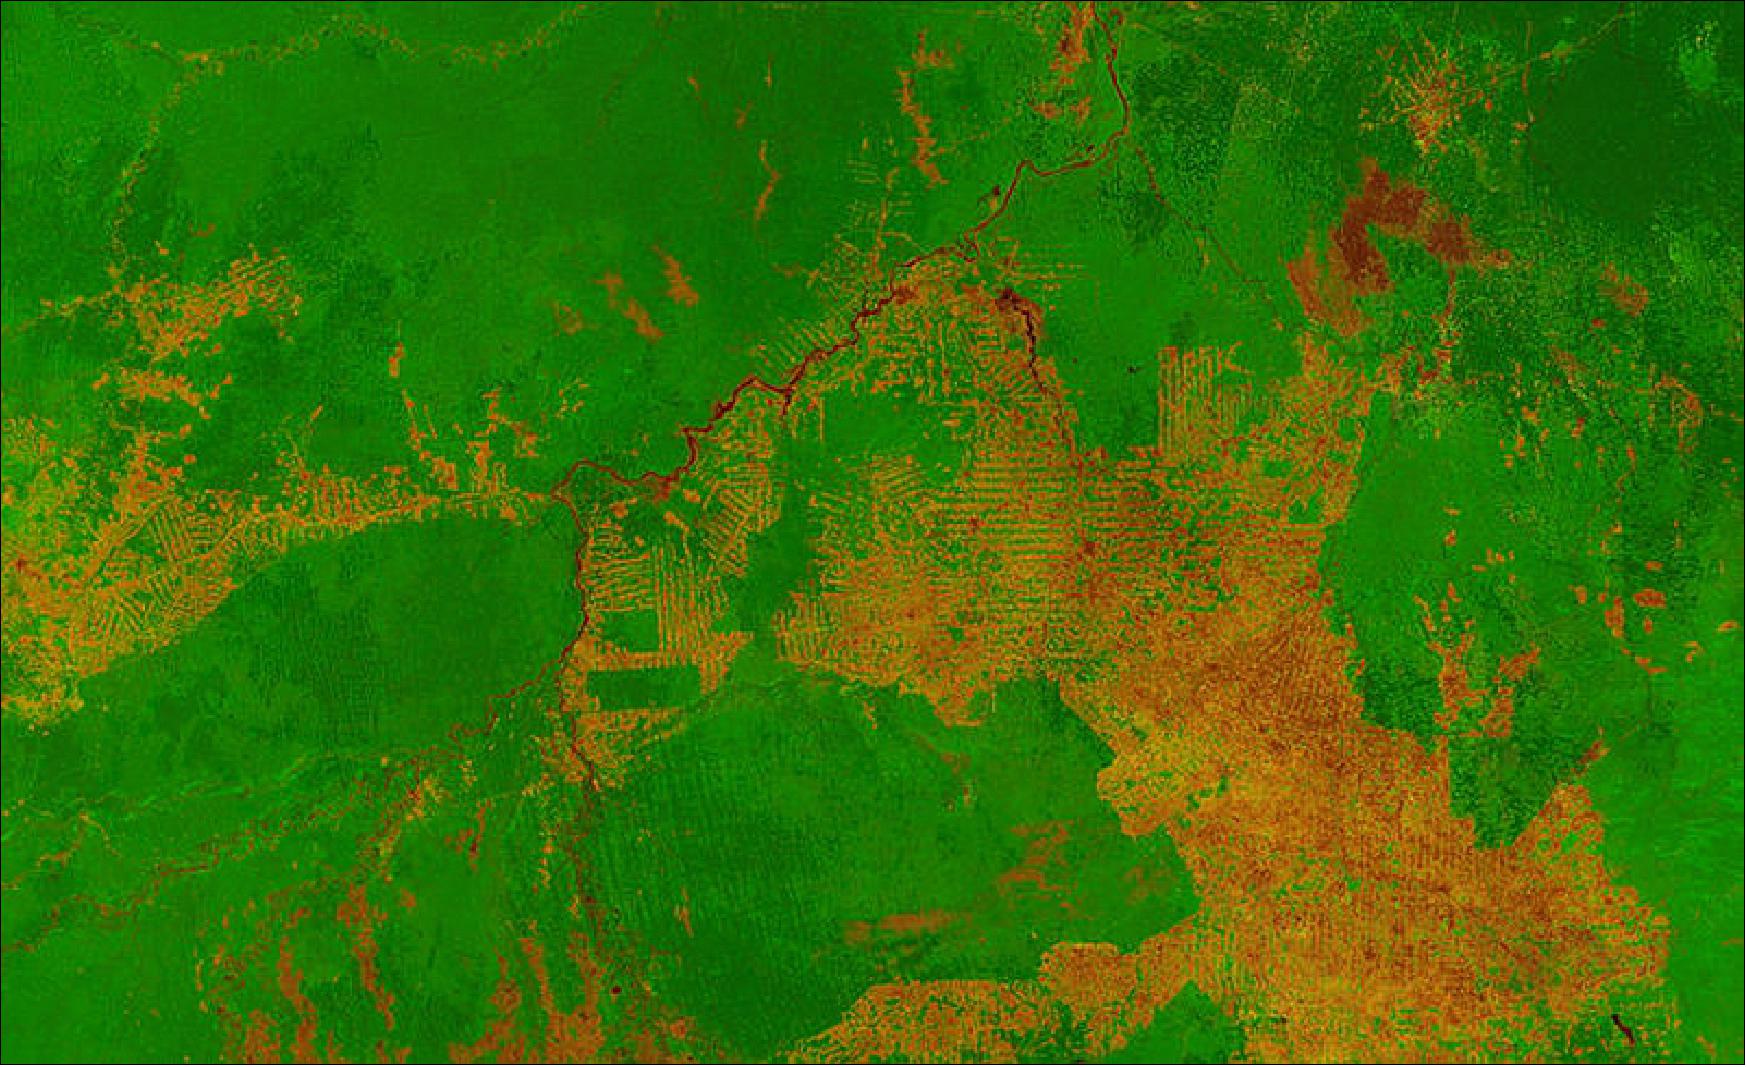 Figure 55: Deforestation in the state of Rondônia in western Brazil, as imaged by ESA's PROBA-V minisatellite (image credit: ESA, VITO)